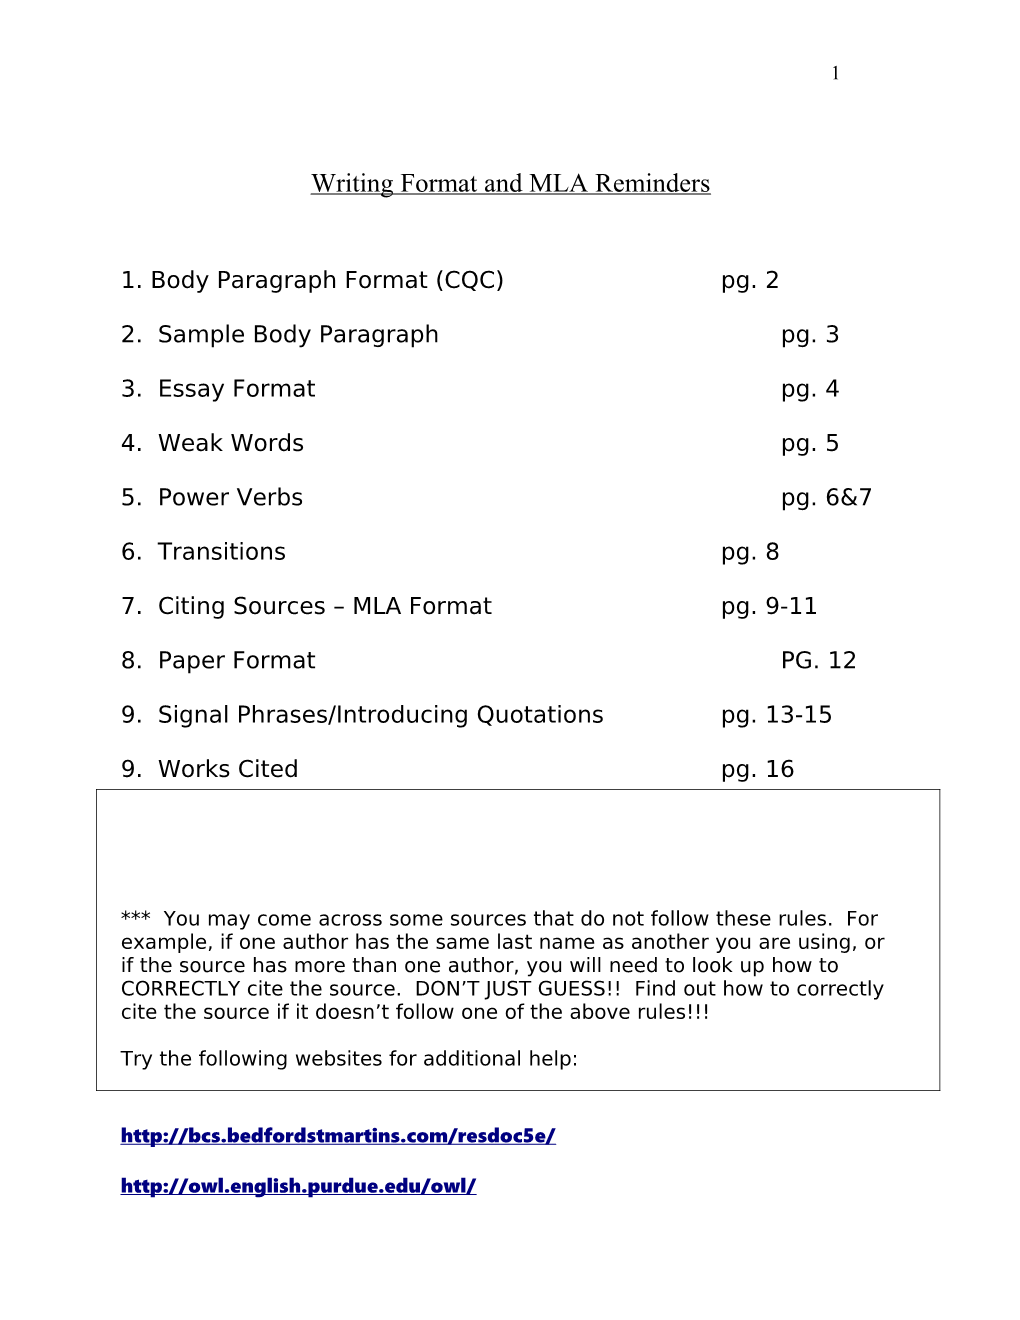 Writing Format and MLA Reminders